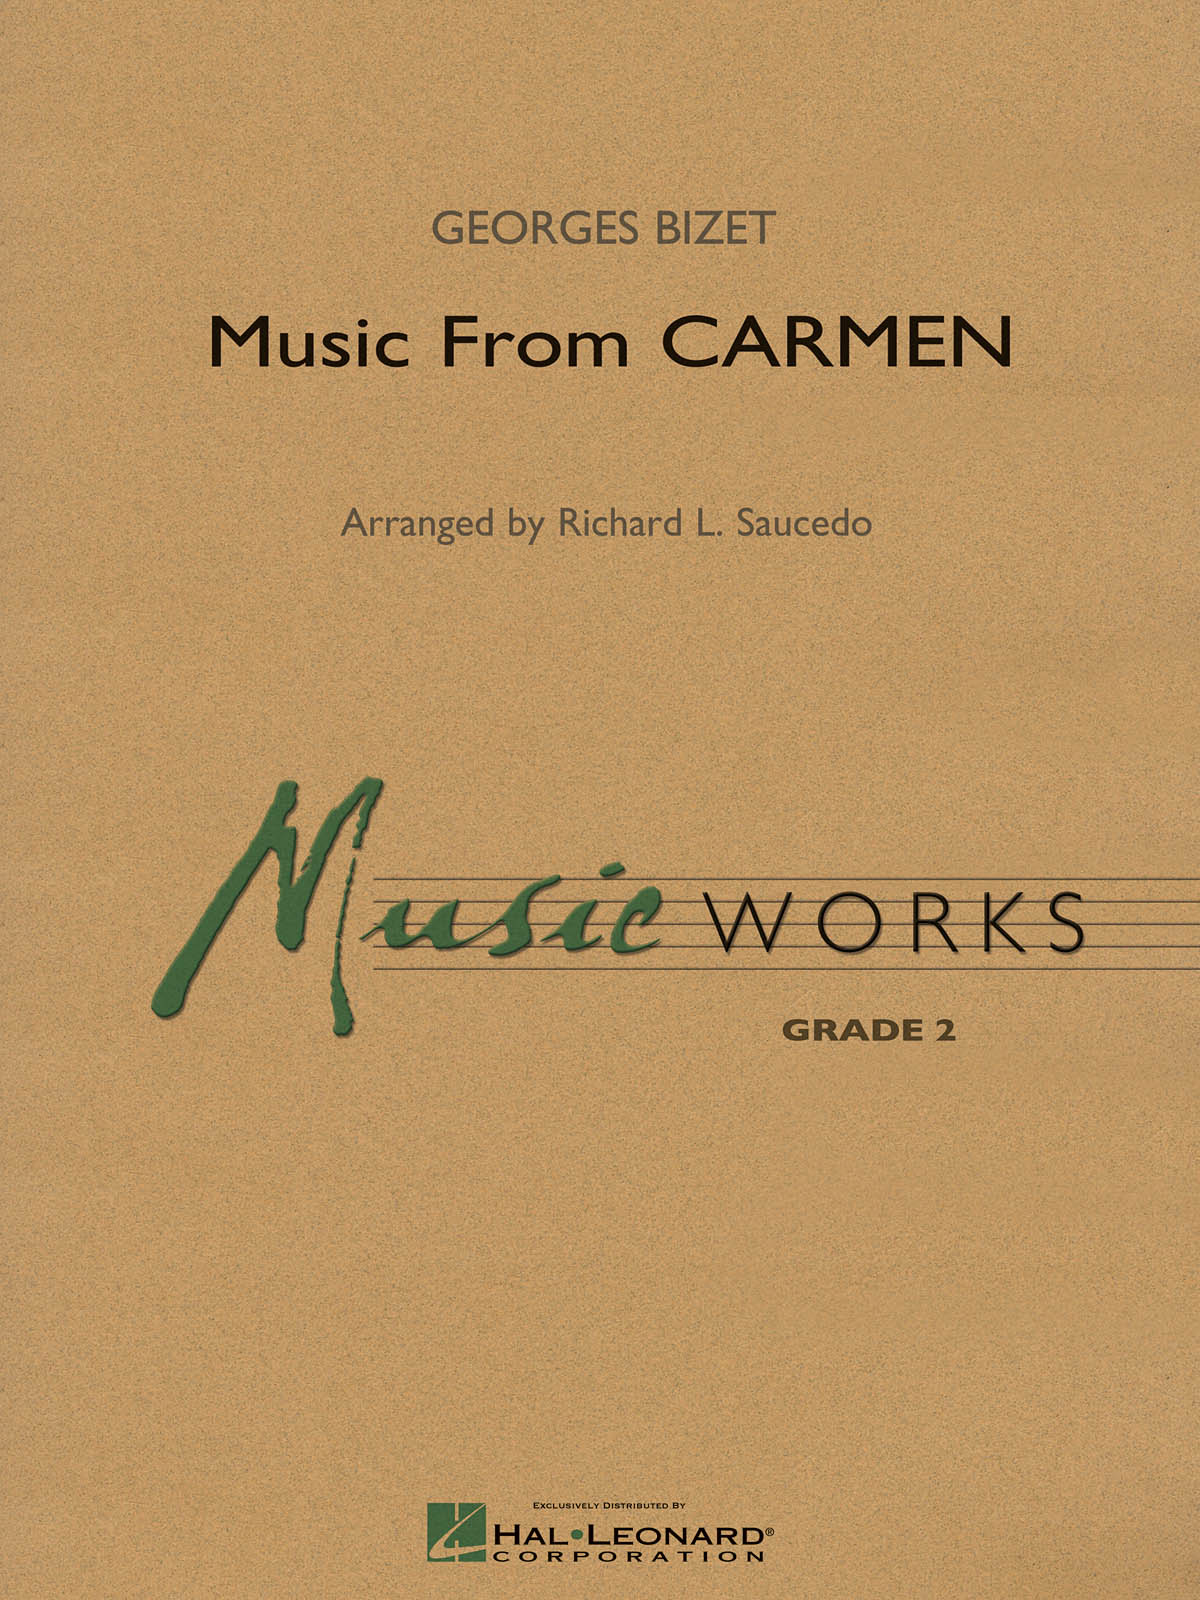 Georges Bizet: Music from Carmen